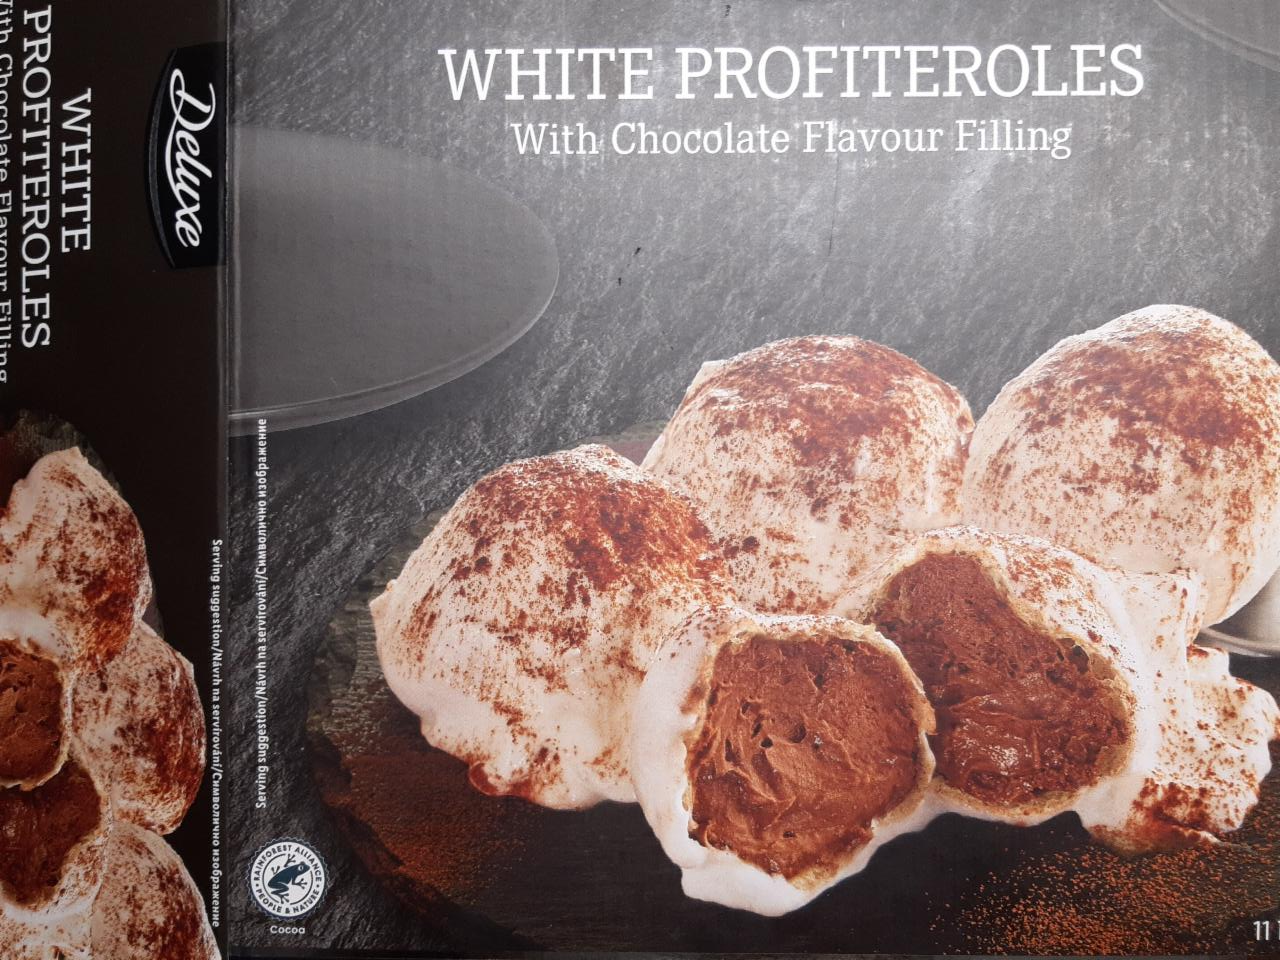 Fotografie - White Profiteroles With Chocolate Flavour Filling Deluxe